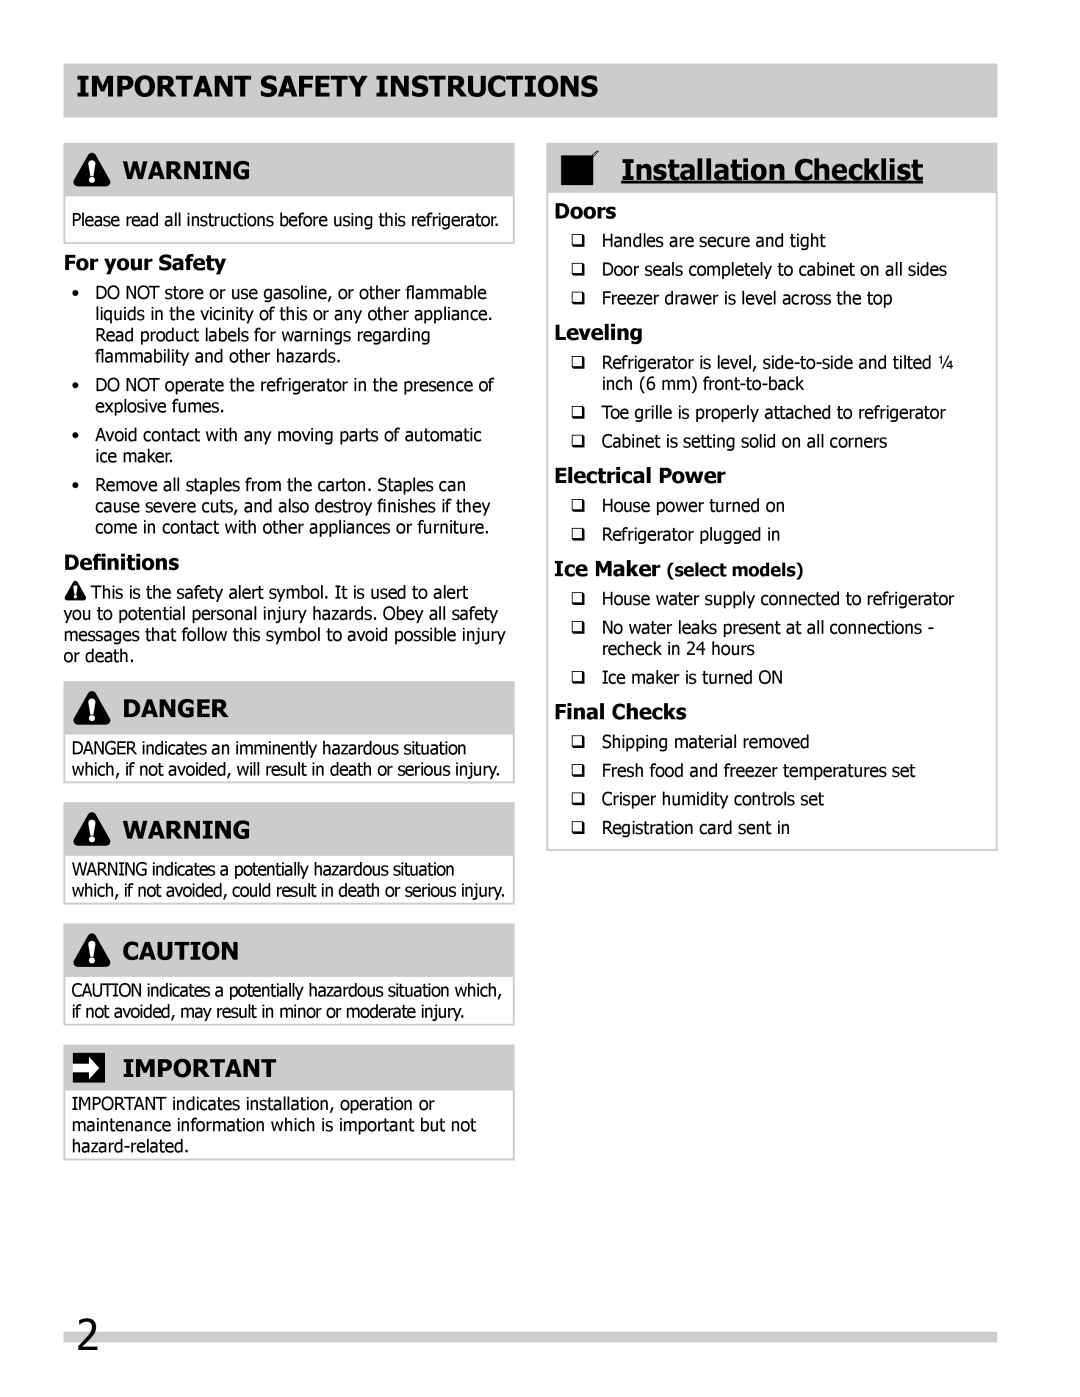 Frigidaire 242292000 Important Safety Instructions, Installation Checklist, Danger, For your Safety, Definitions, Doors 